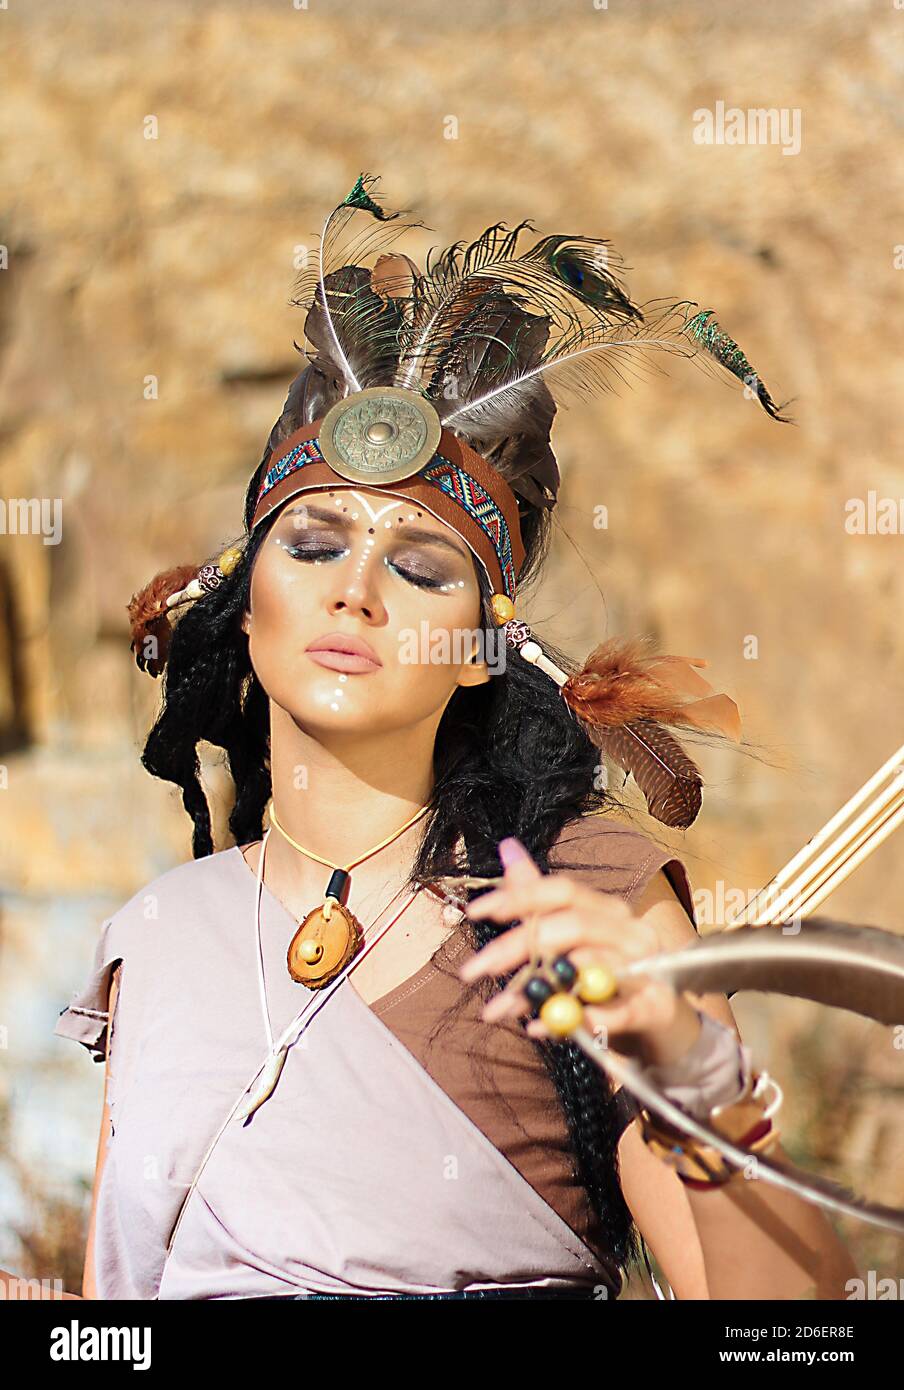 Closeup image of a woman dressed as a Native American with her eyes closed Stock Photo